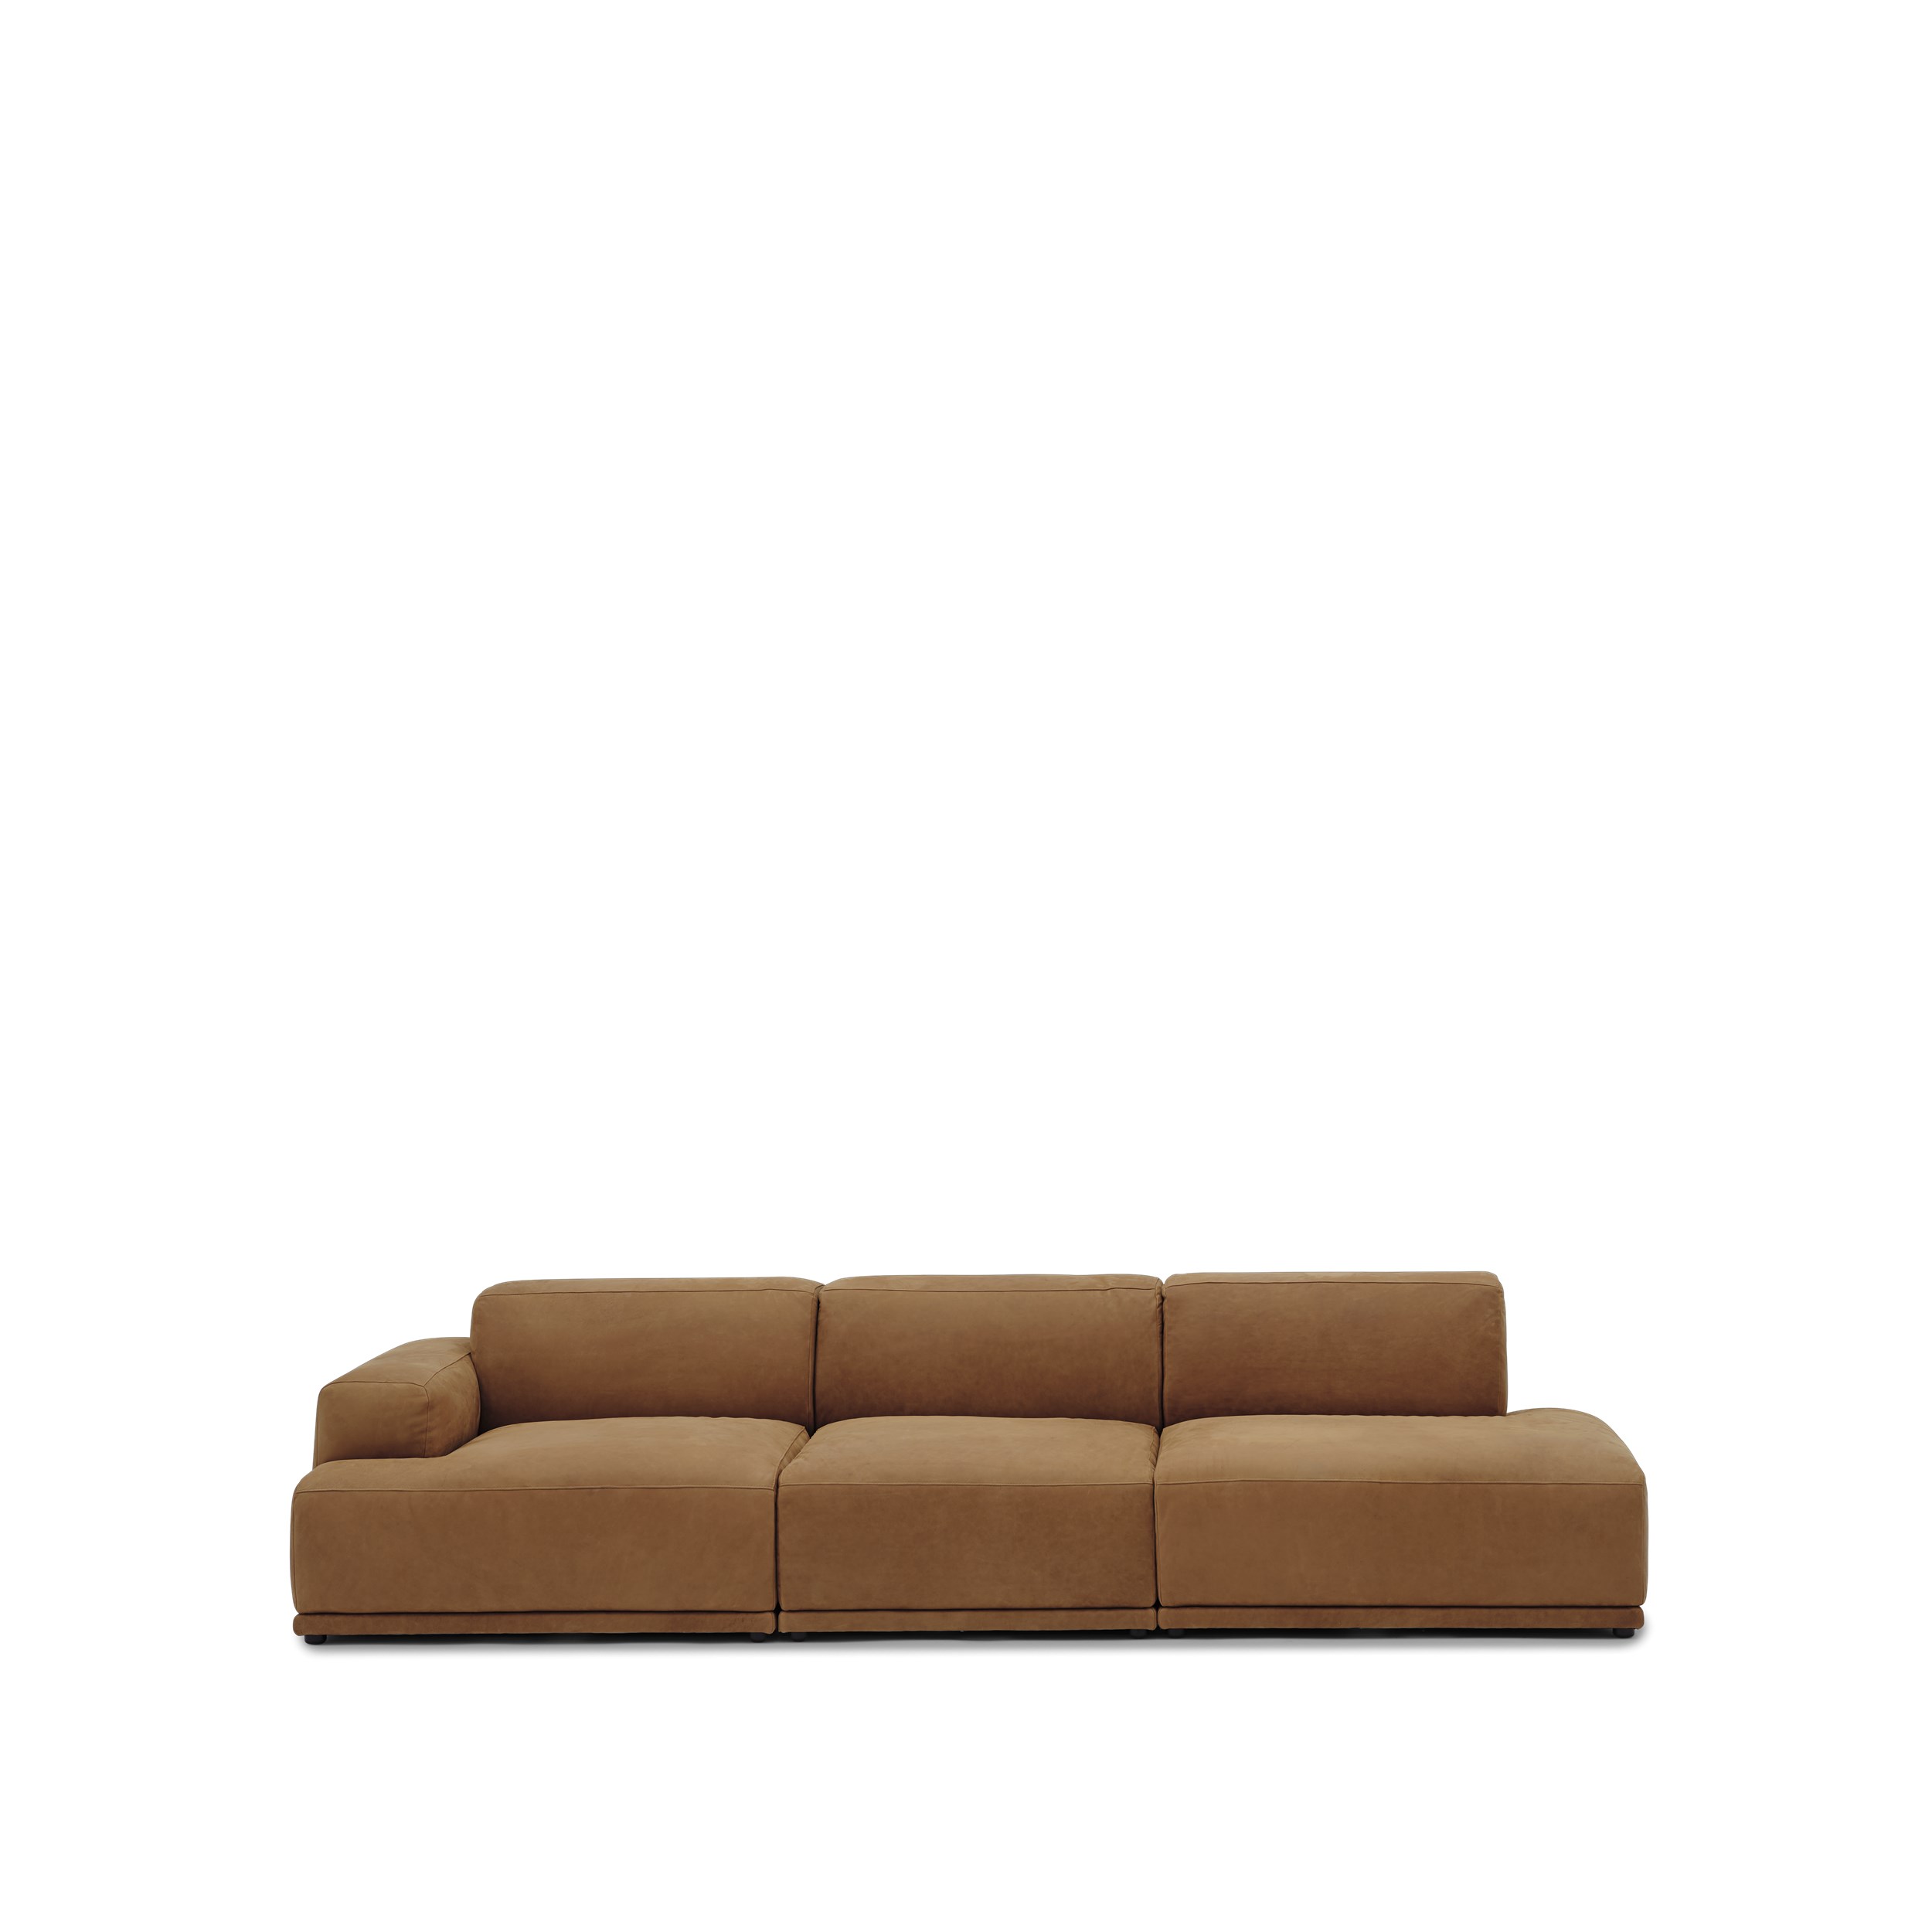 Connect SOFT Modular Sofa No 1- 3 seater, Leather L292cm